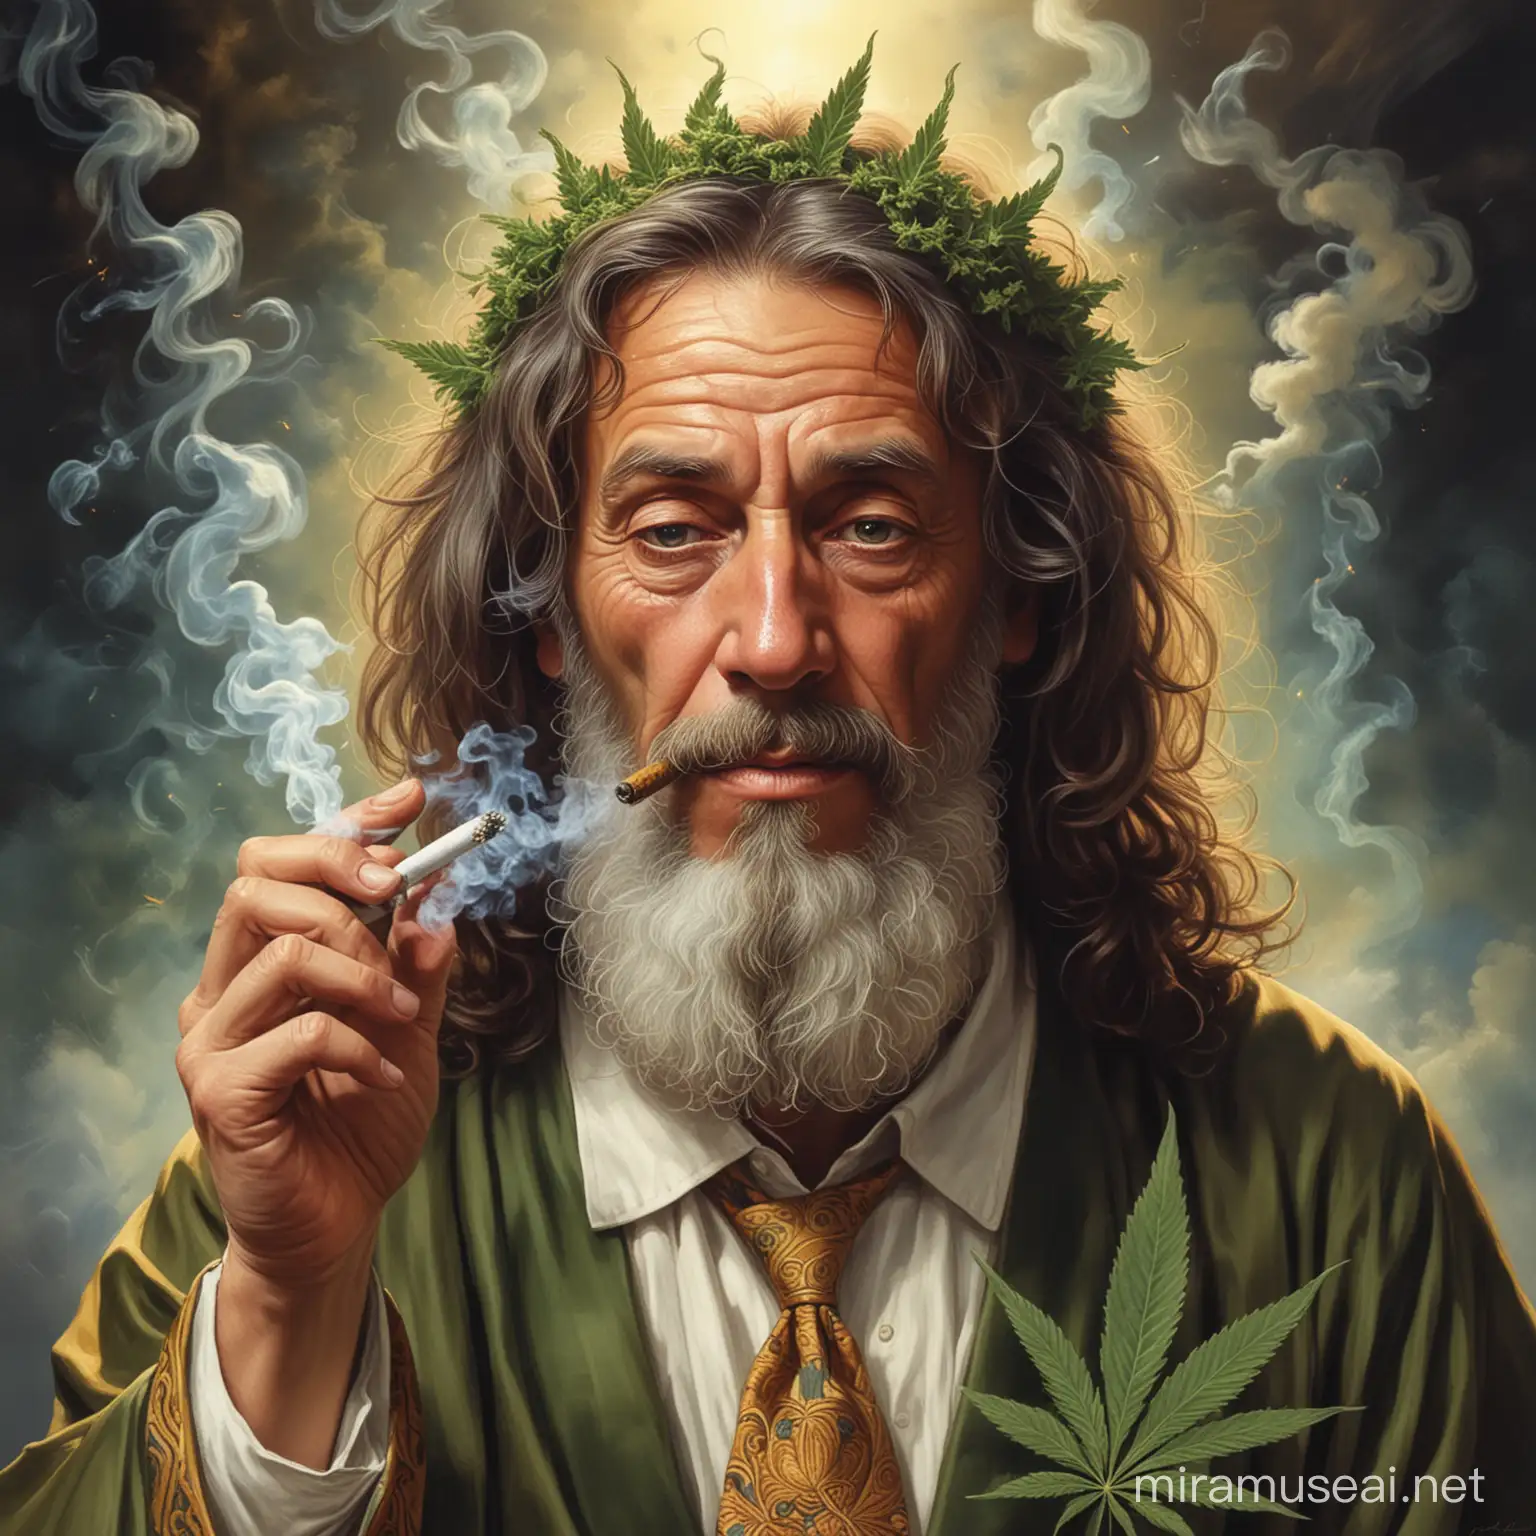 Sovereign Serenity A Lord Engaging in Cannabis Consumption